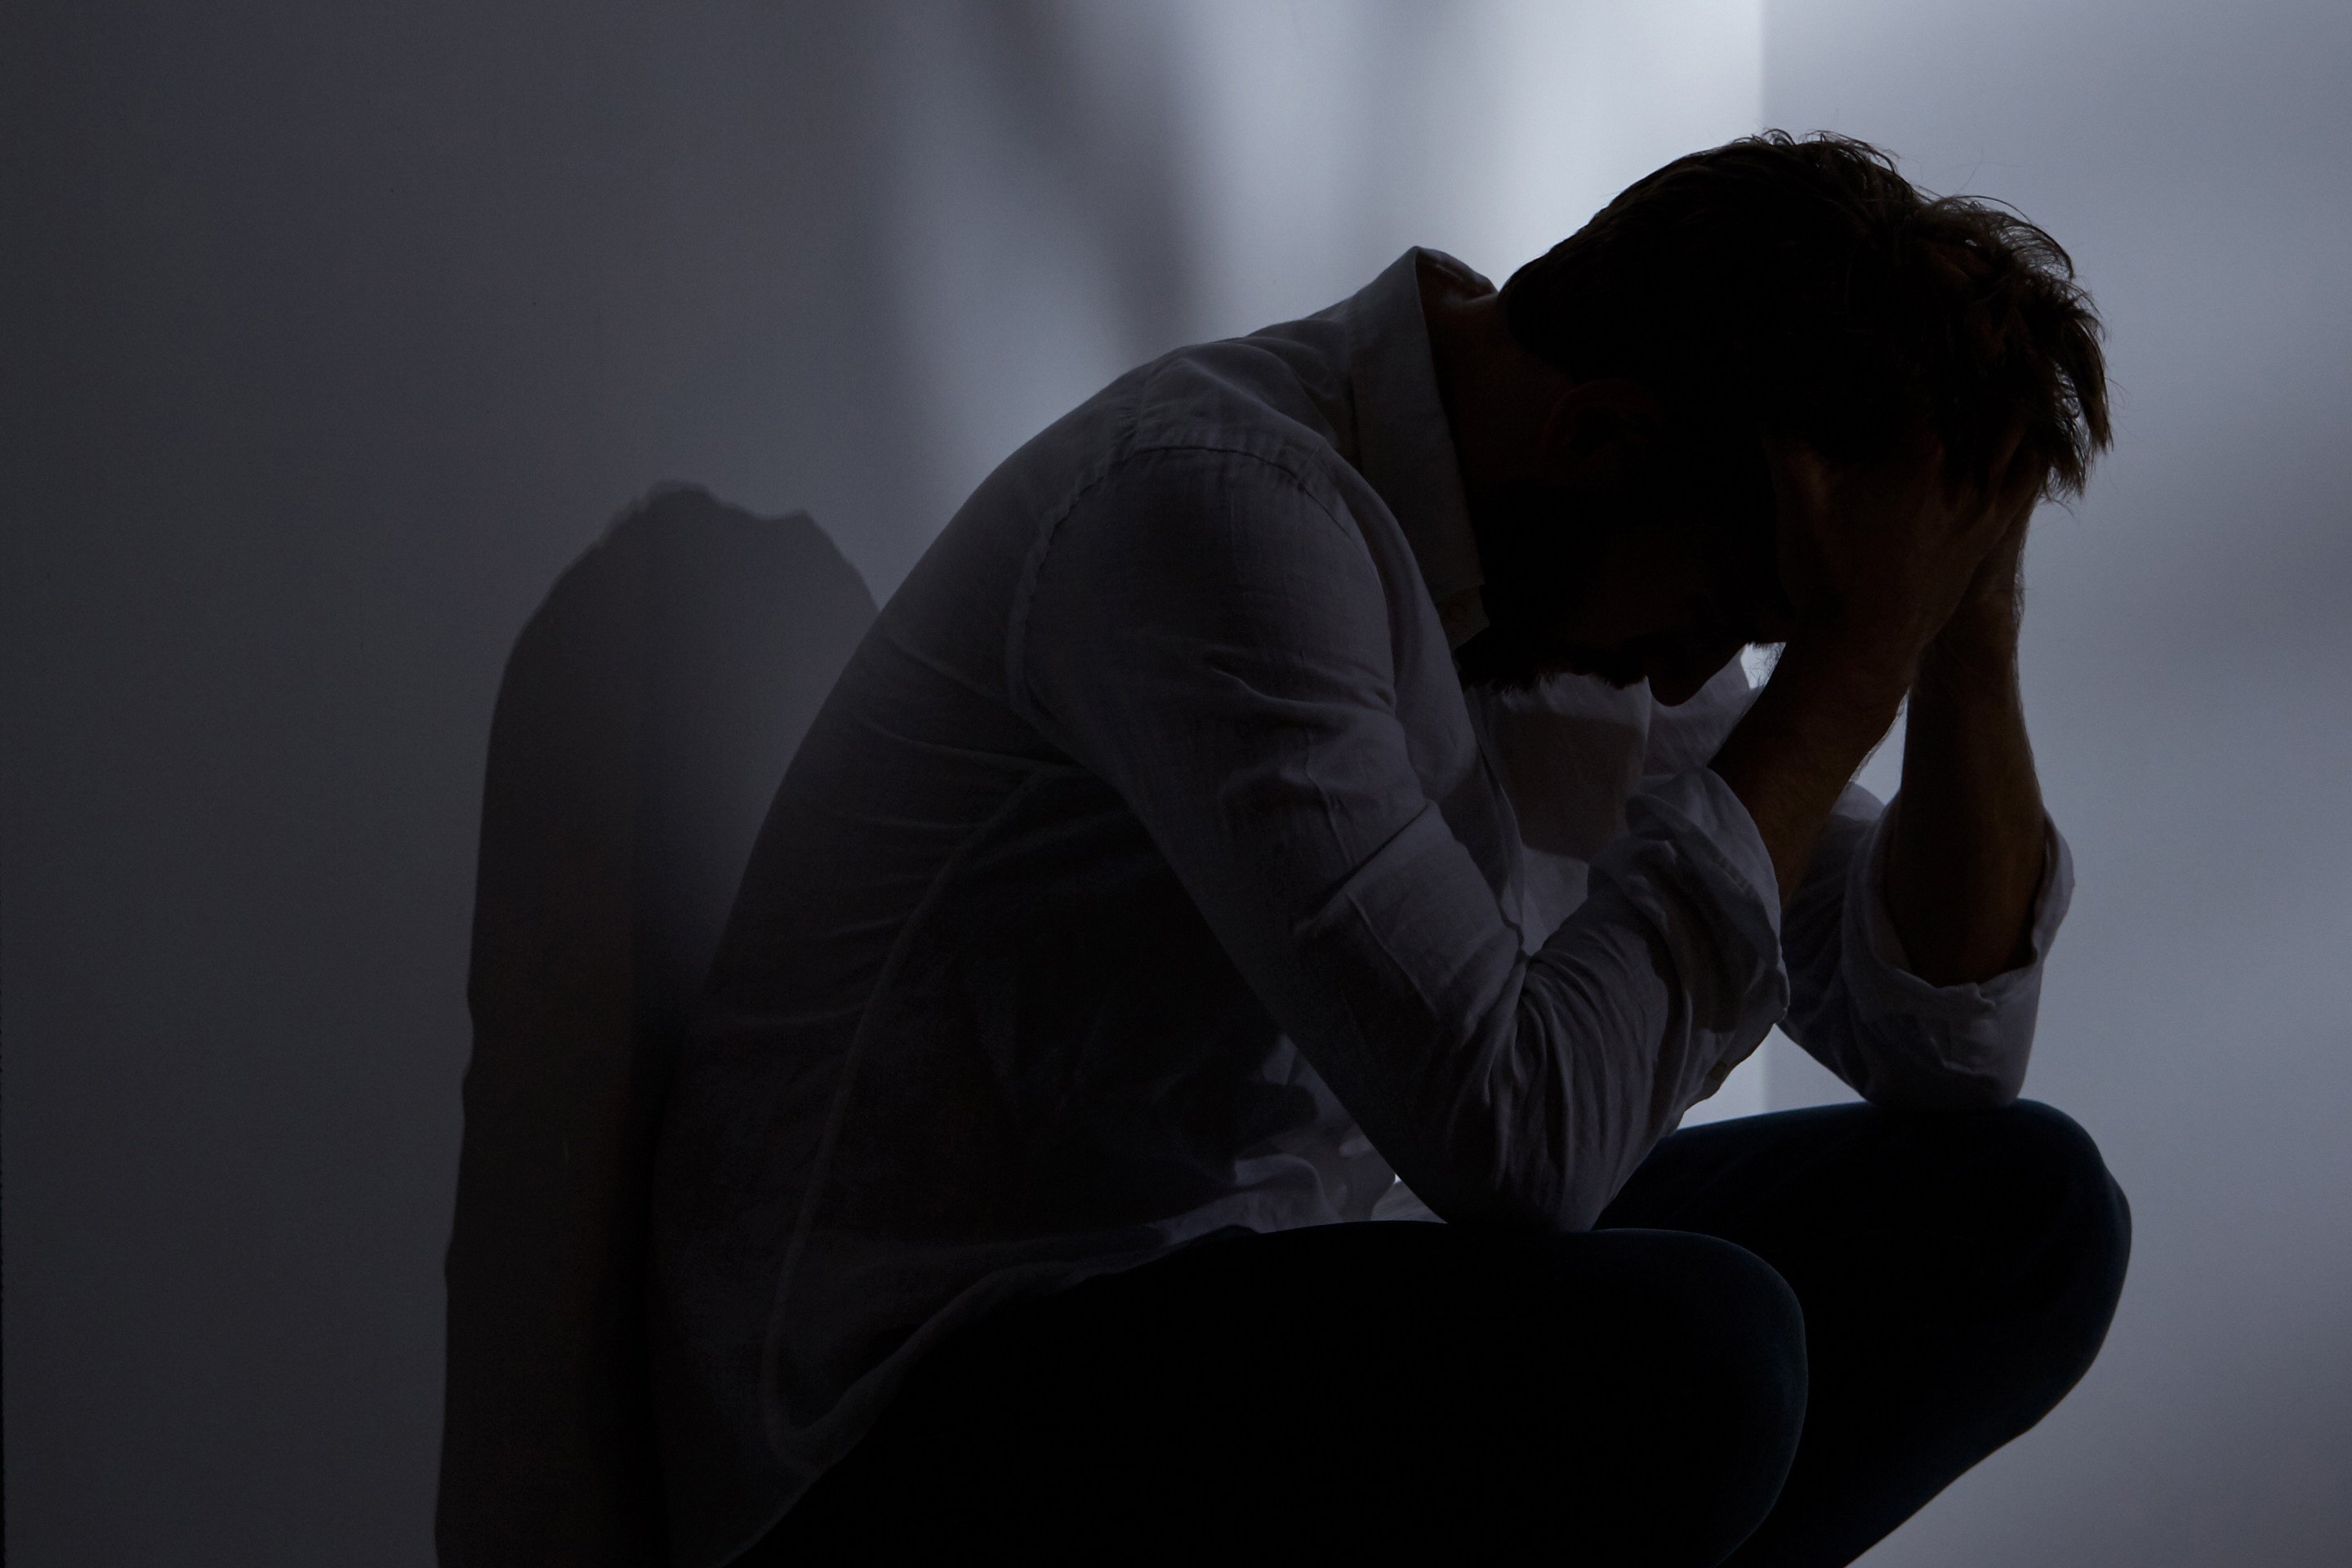 Survey also finds that only 11.3 per cent of Hongkongers understand the symptoms of serious schizophrenia such as disorganised thoughts. Photo: Shutterstock